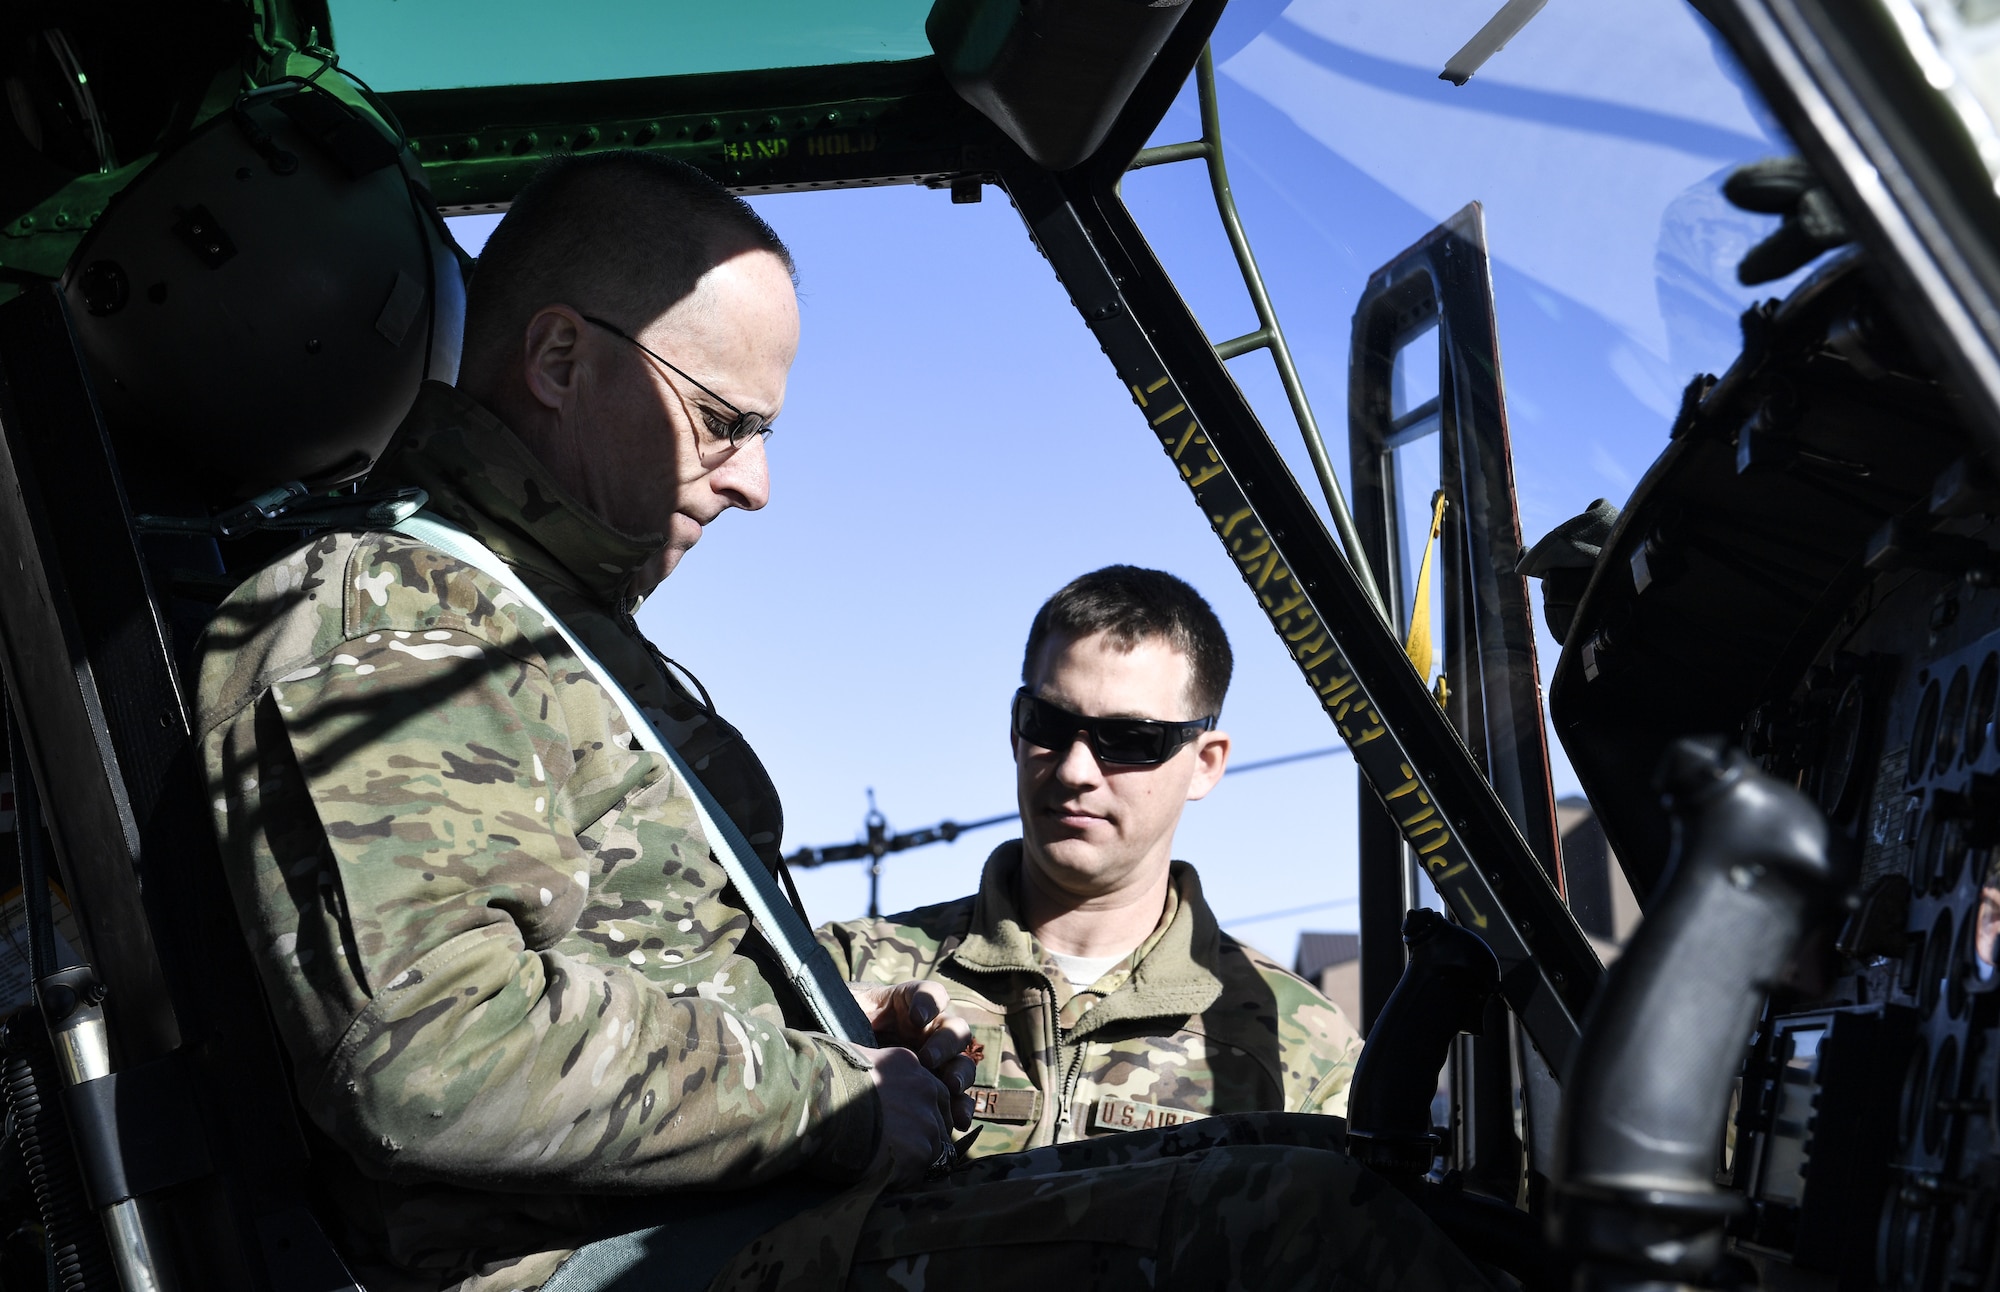 Maj. Gen. Mark E. Weatherington, Air Education and Training Command deputy commander, is assisted by Maj. Zachary Minner, 512th Rescue Squadron director of staff